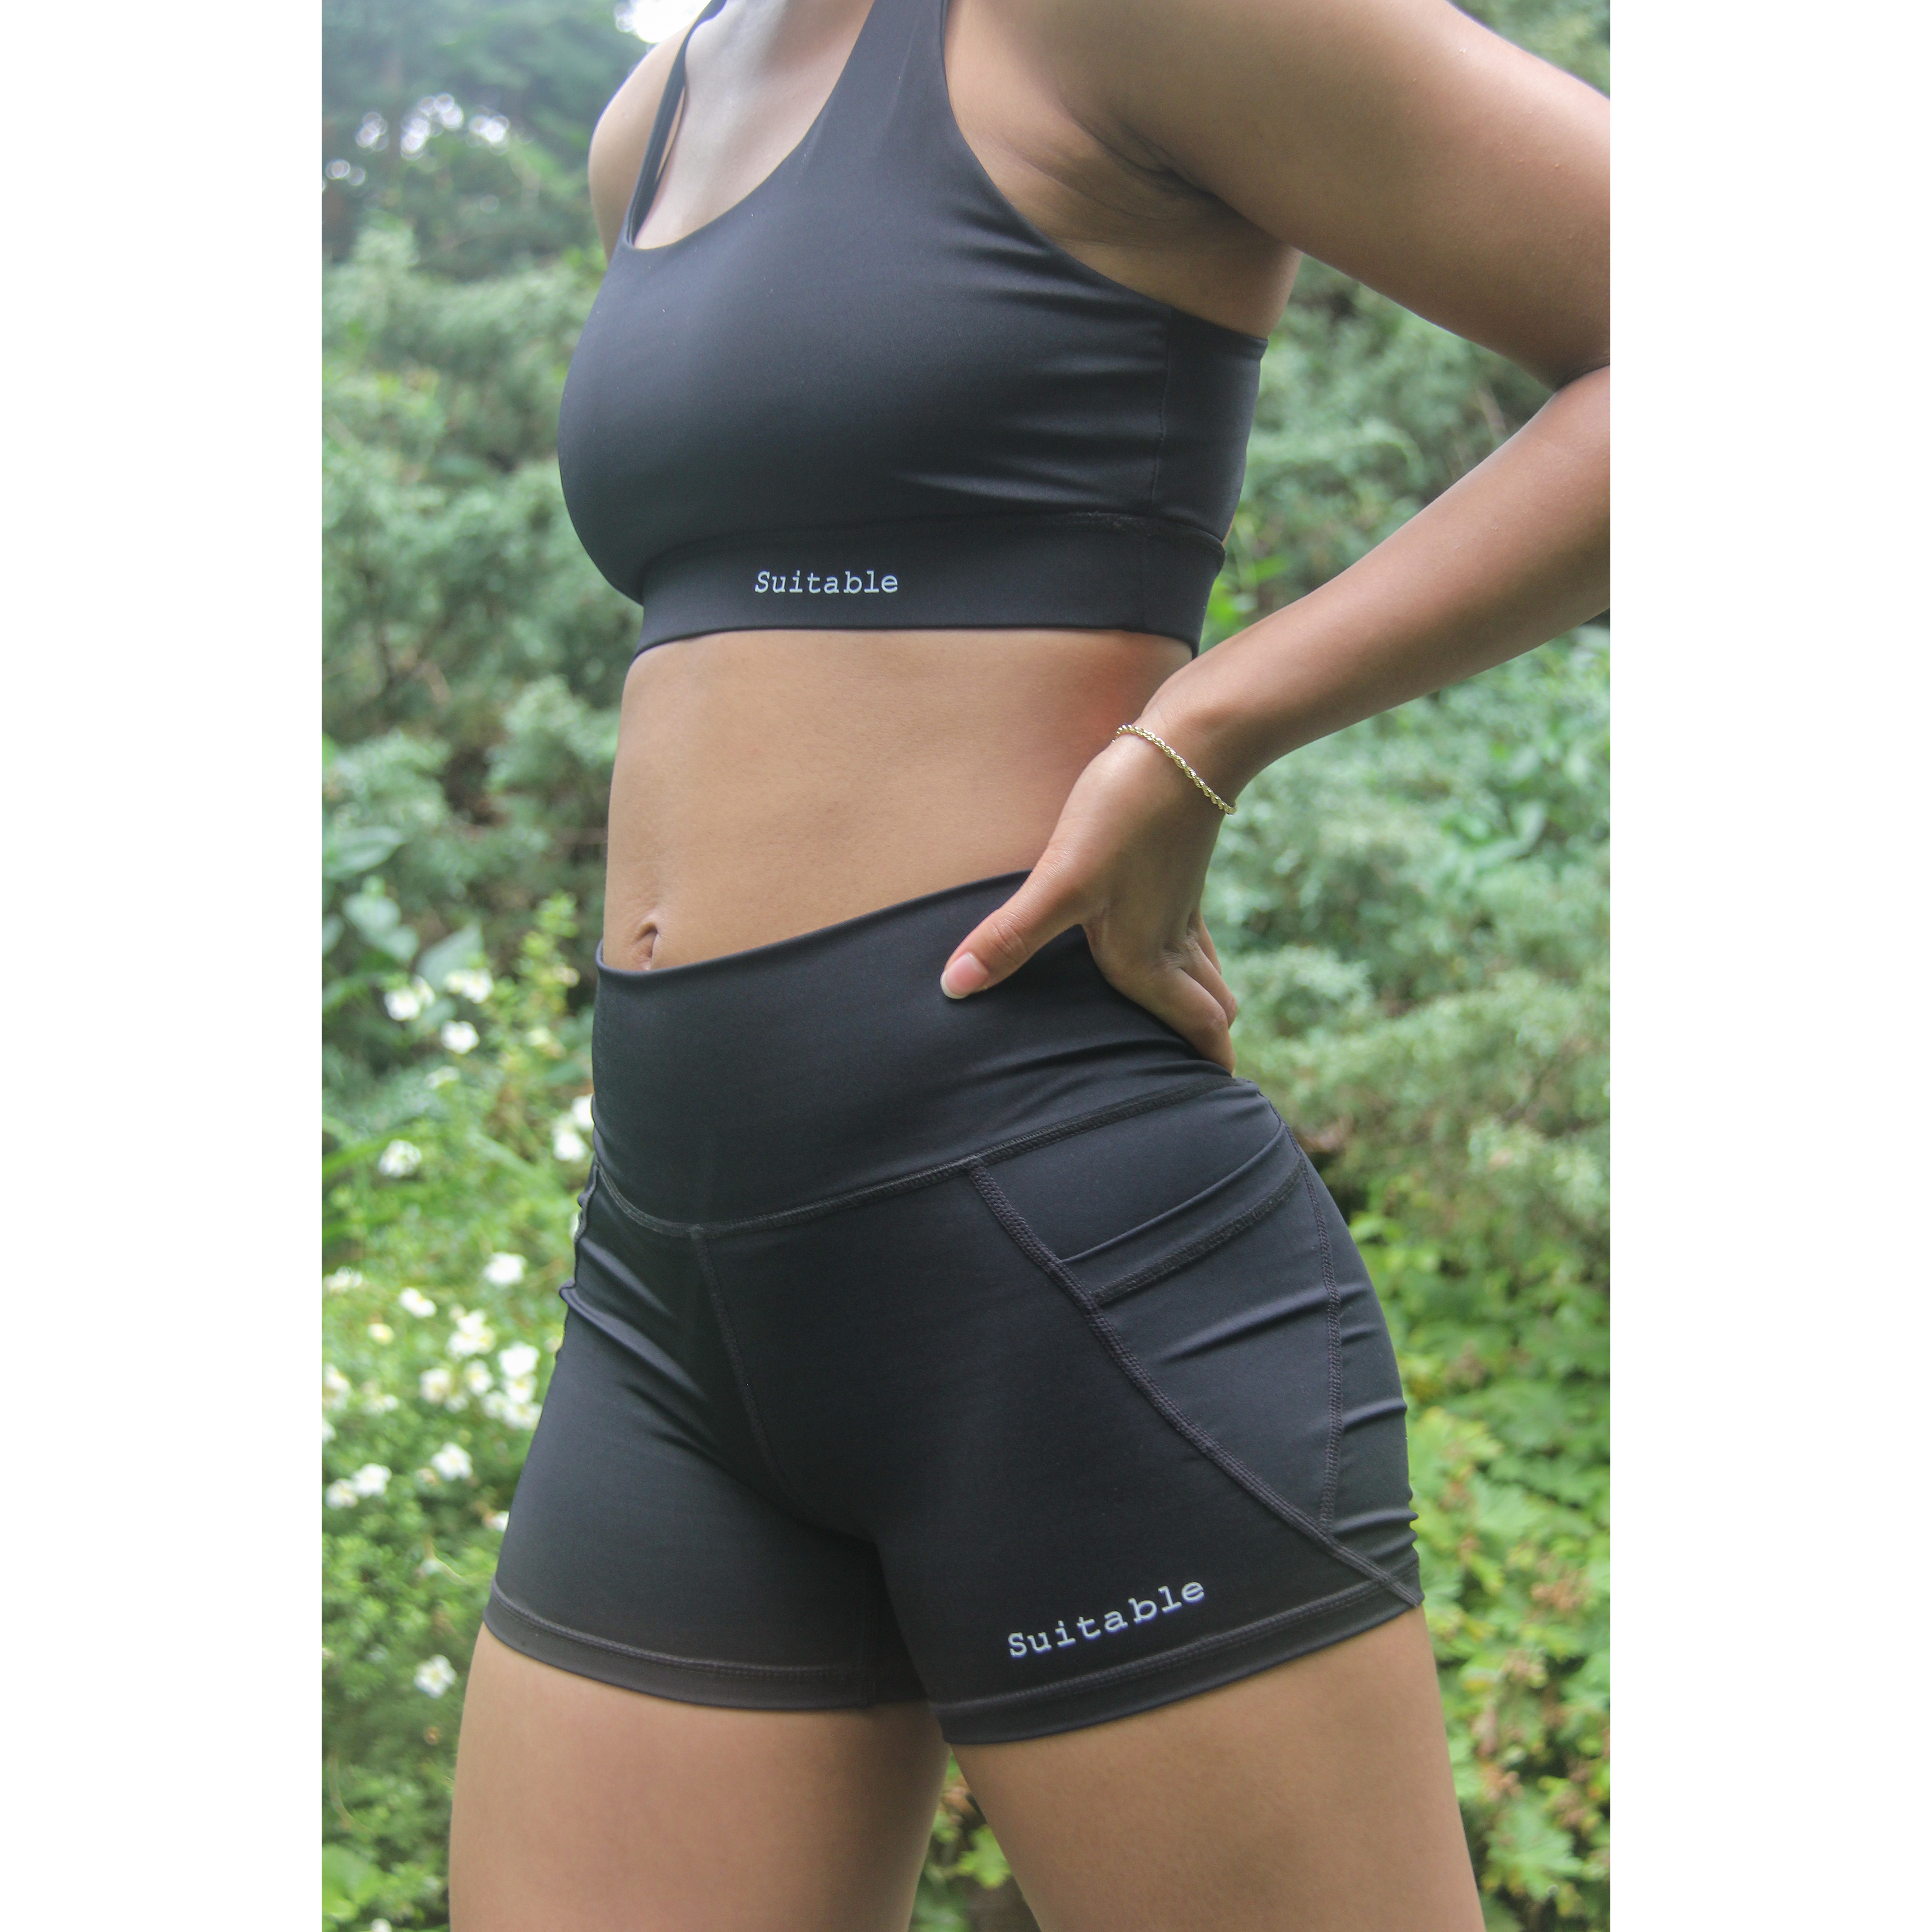 Adult Athletic apparel sports bra and shorts set in black